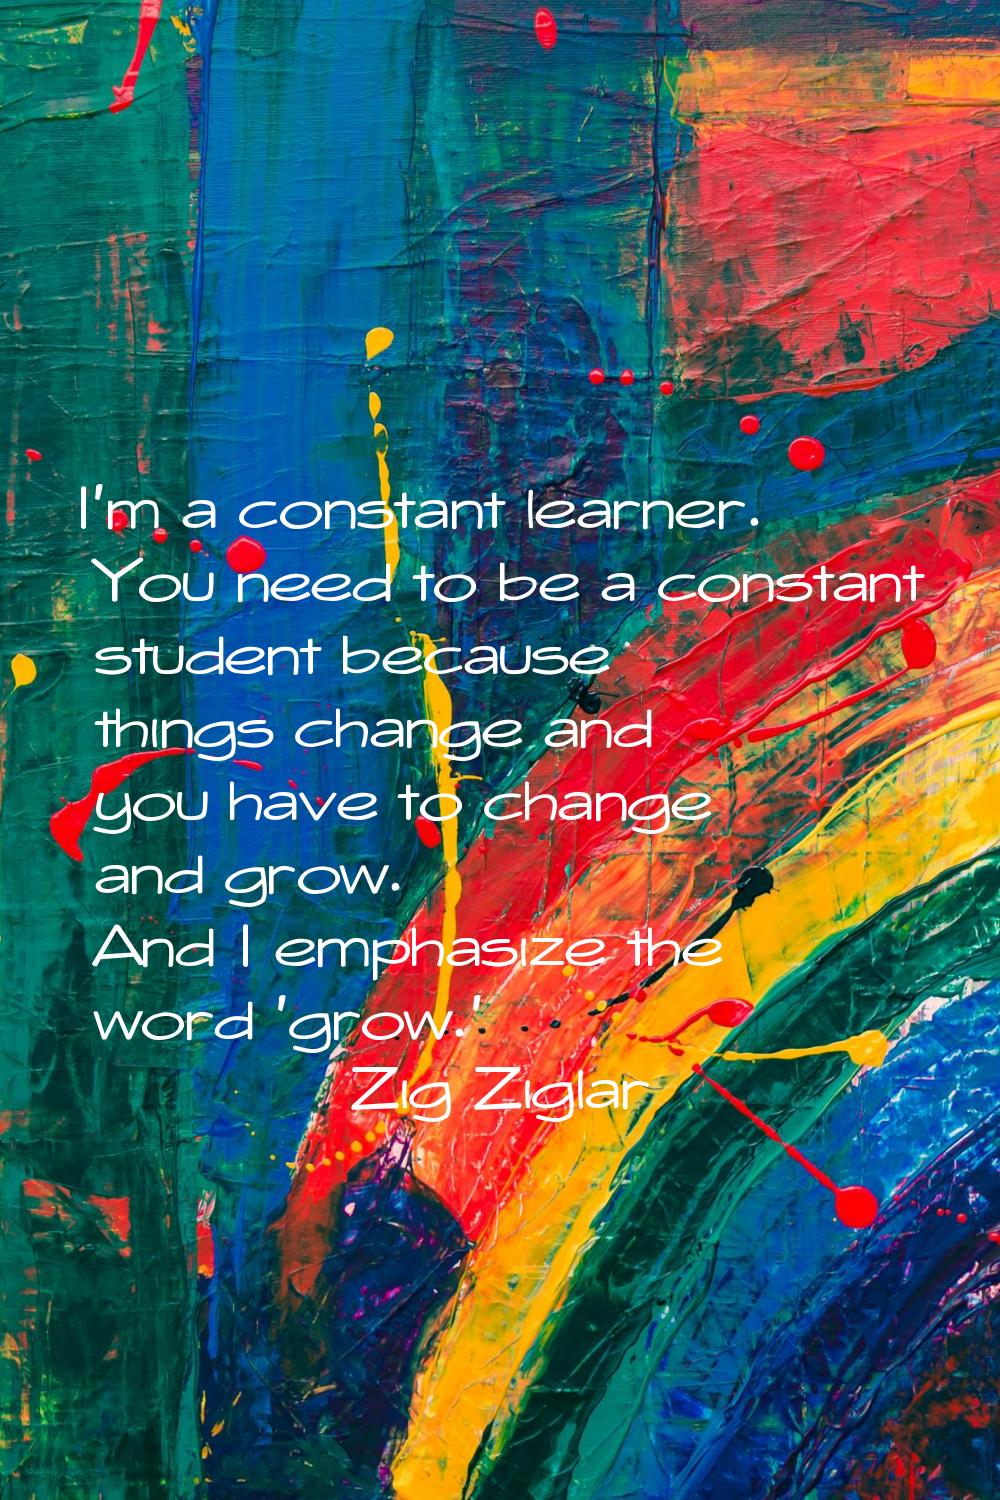 I'm a constant learner. You need to be a constant student because things change and you have to cha